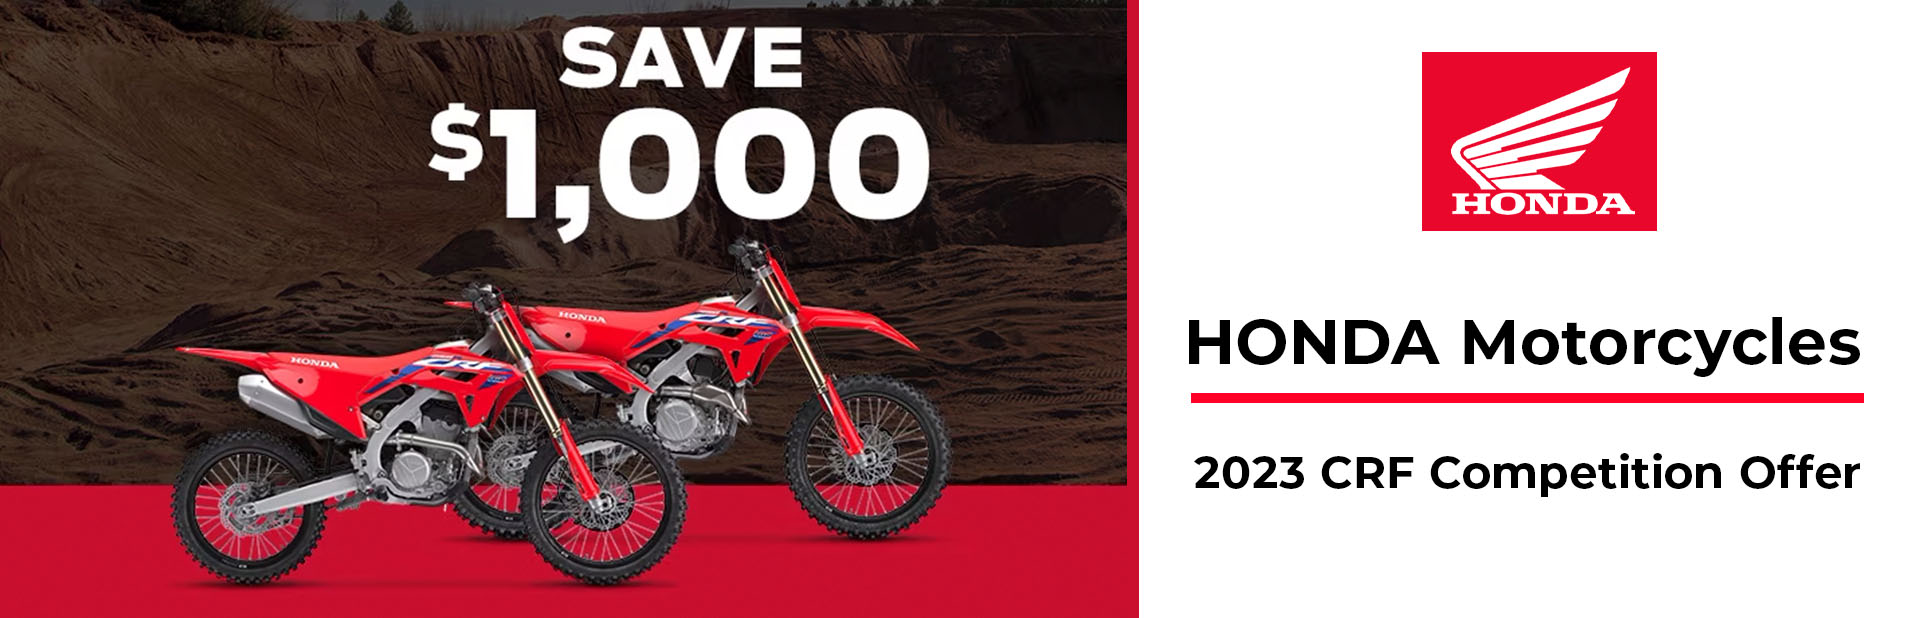 Honda: 2023 CRF Competition Offer